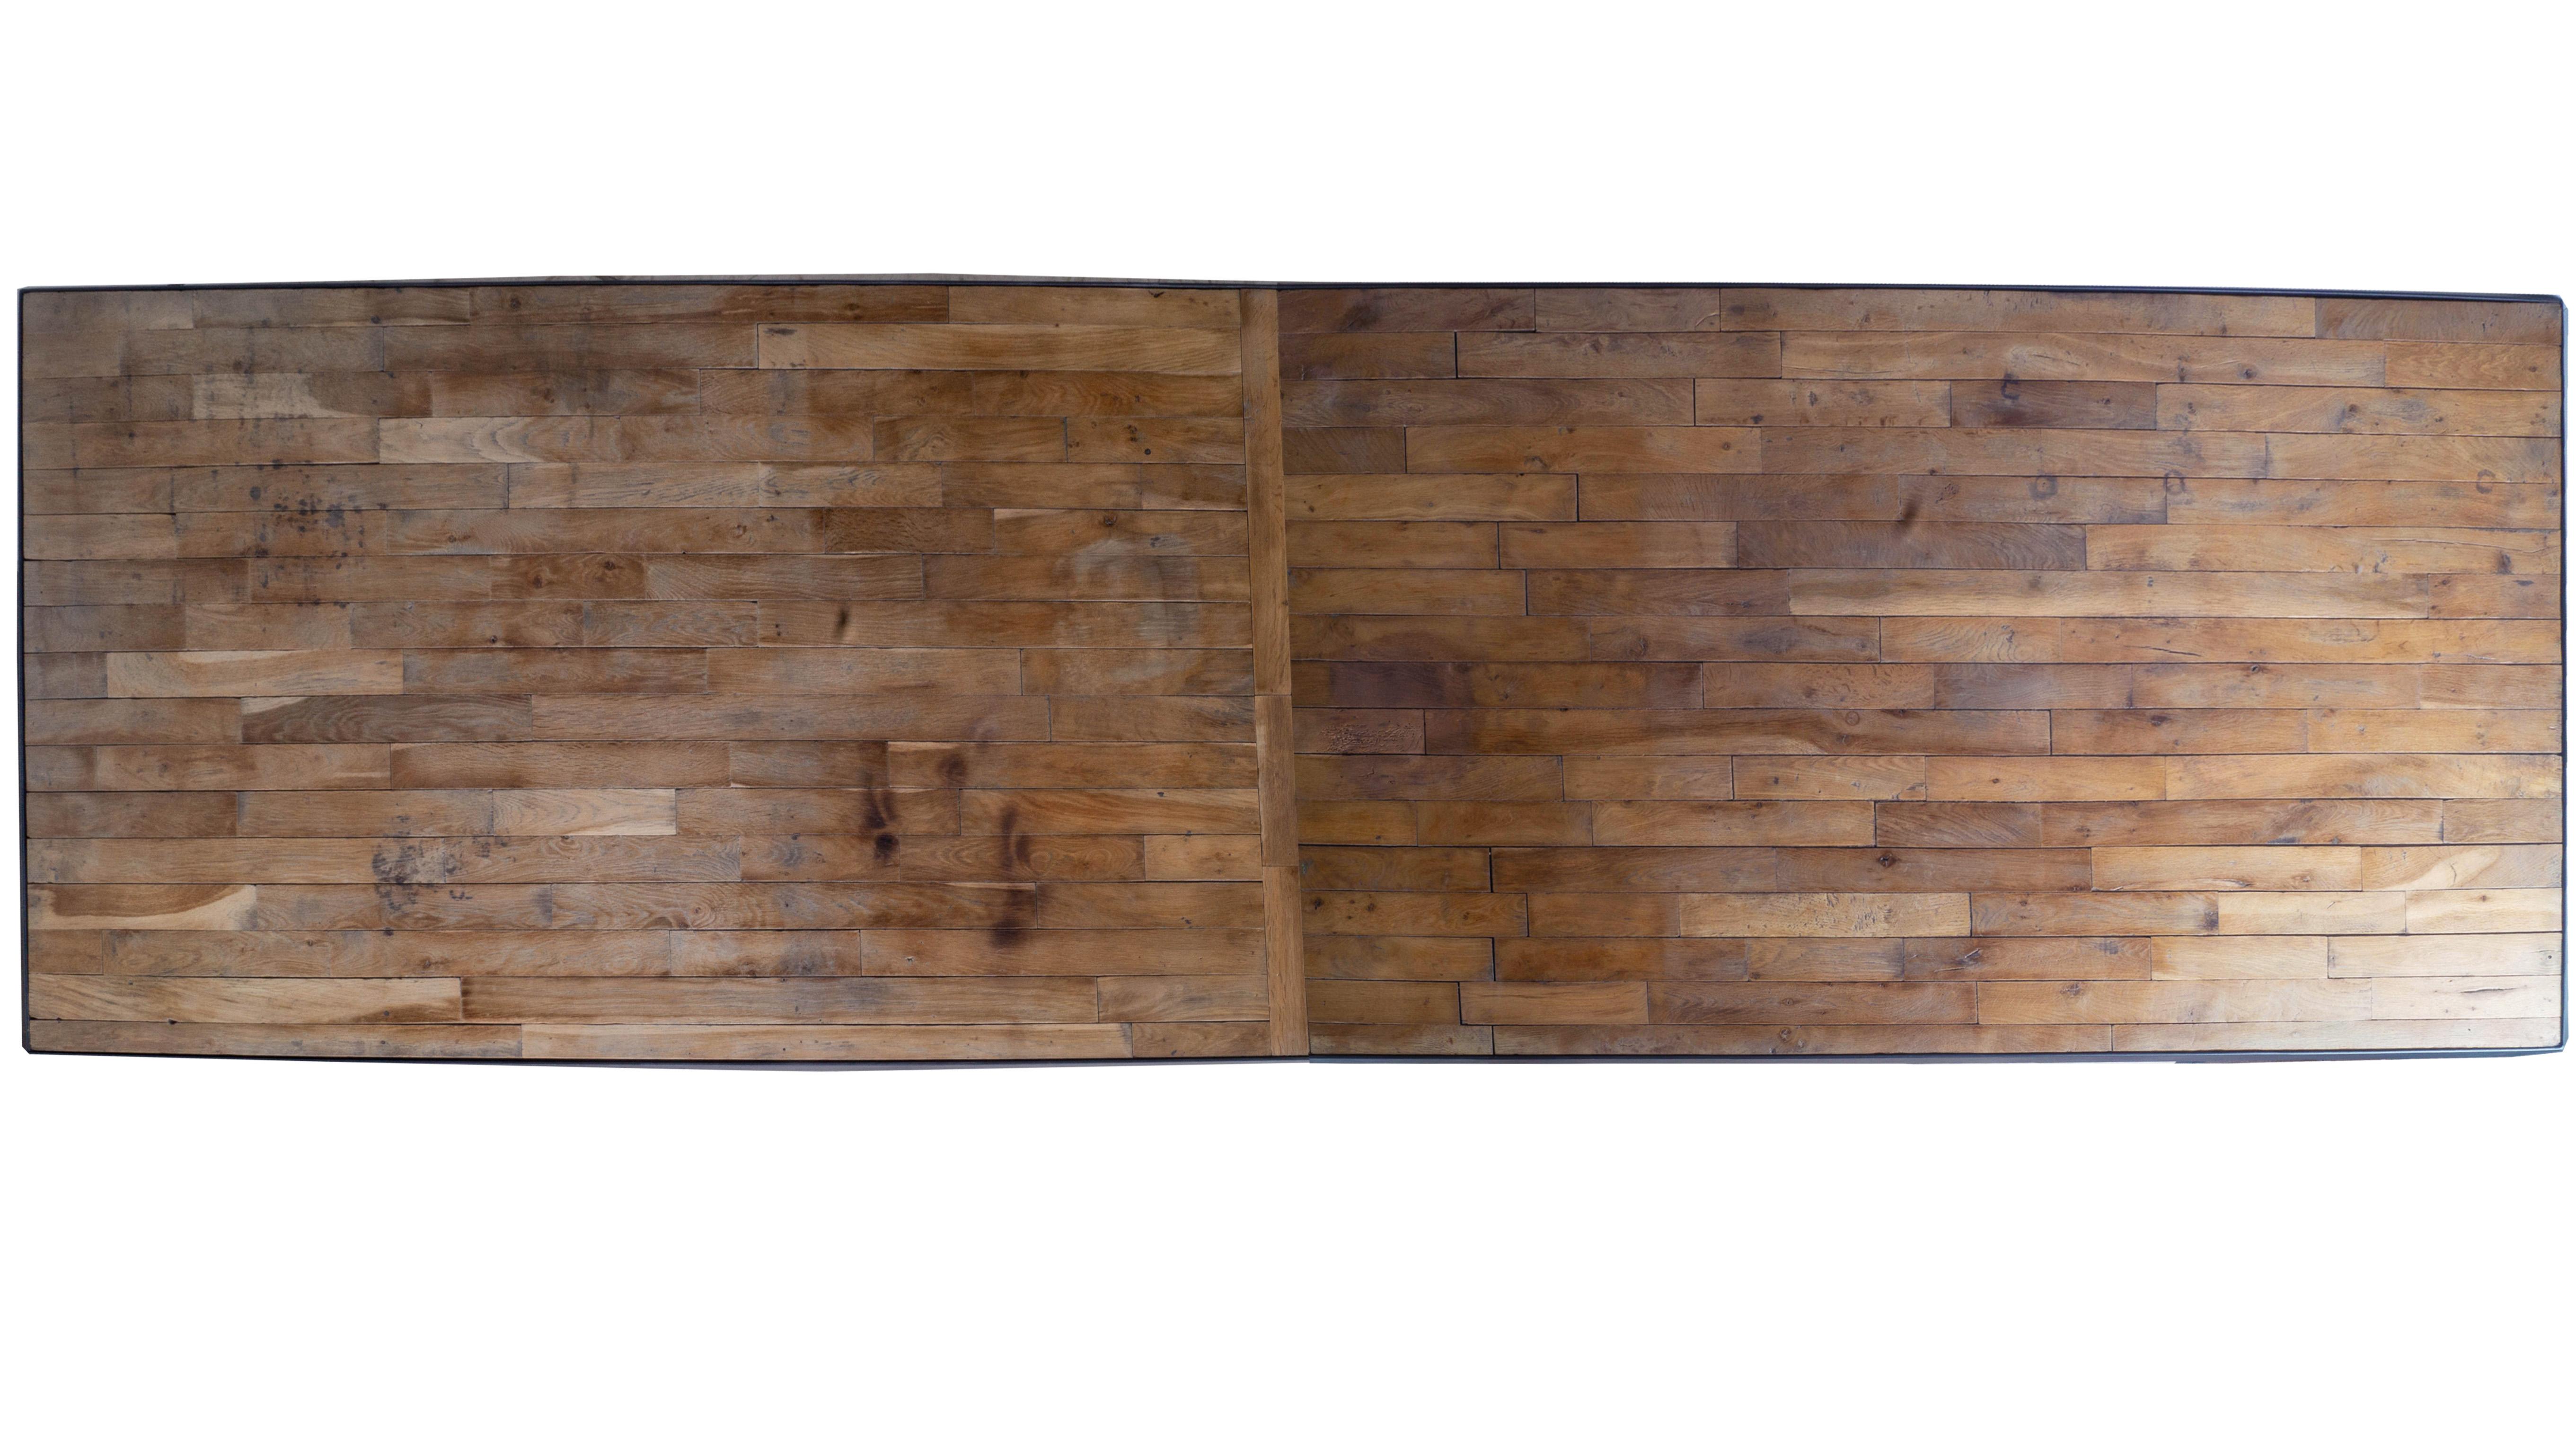 Monumental French floor board dining table with steel banding and base.

This piece is a part of Brendan Bass’s one-of-a-kind collection, Le Monde. French for “The World”, the Le Monde collection is made up of rare and hard to find pieces curated